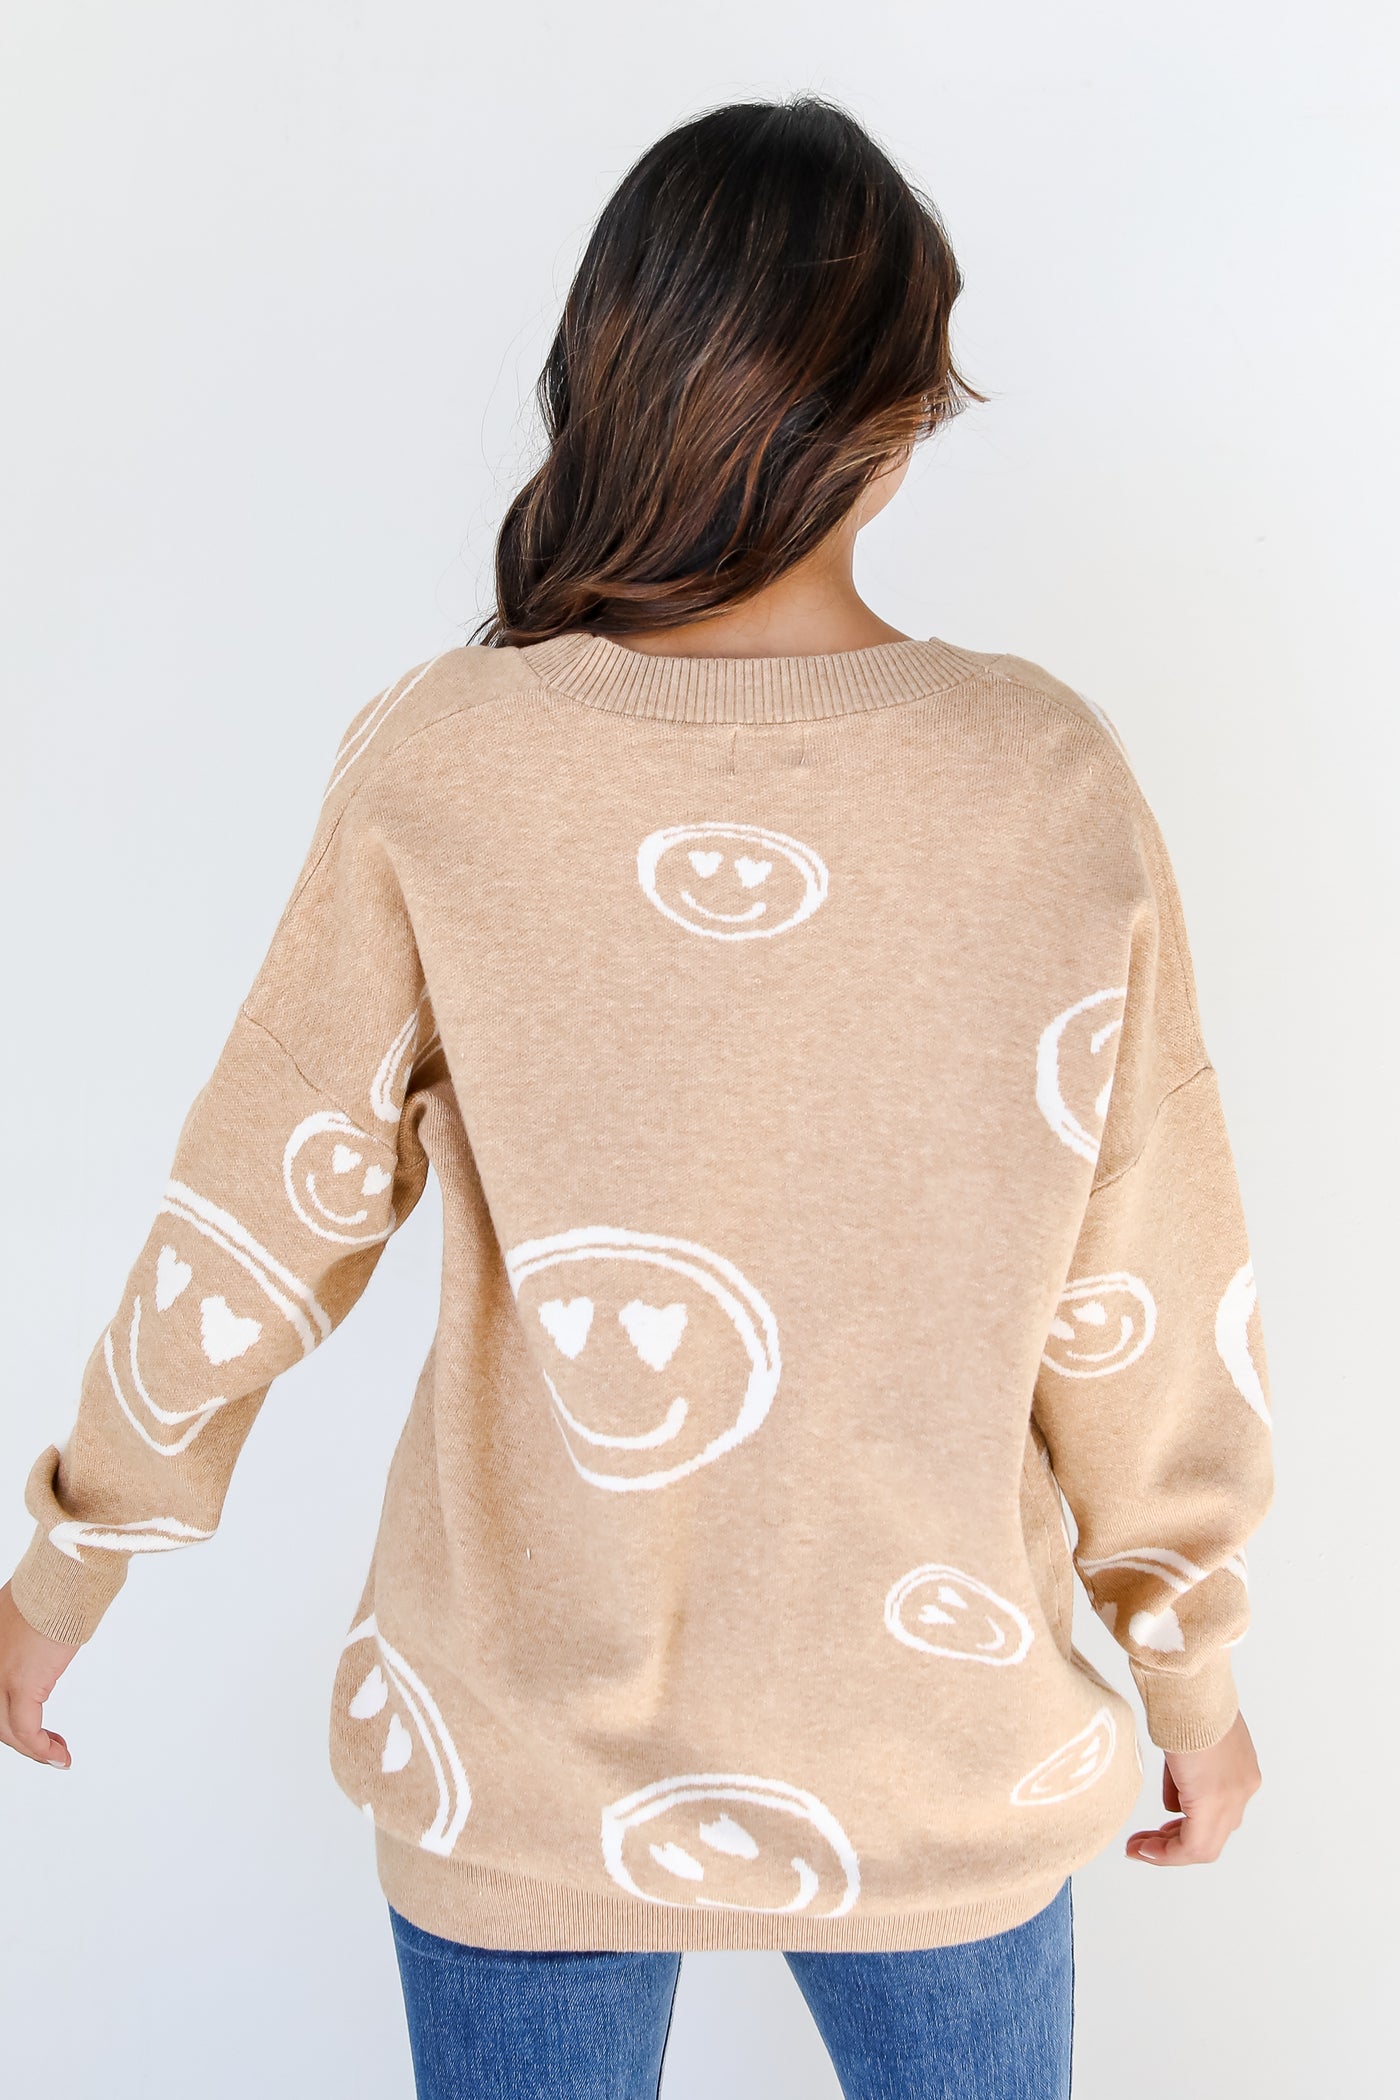 Smiley Face Sweater Cardigan back view